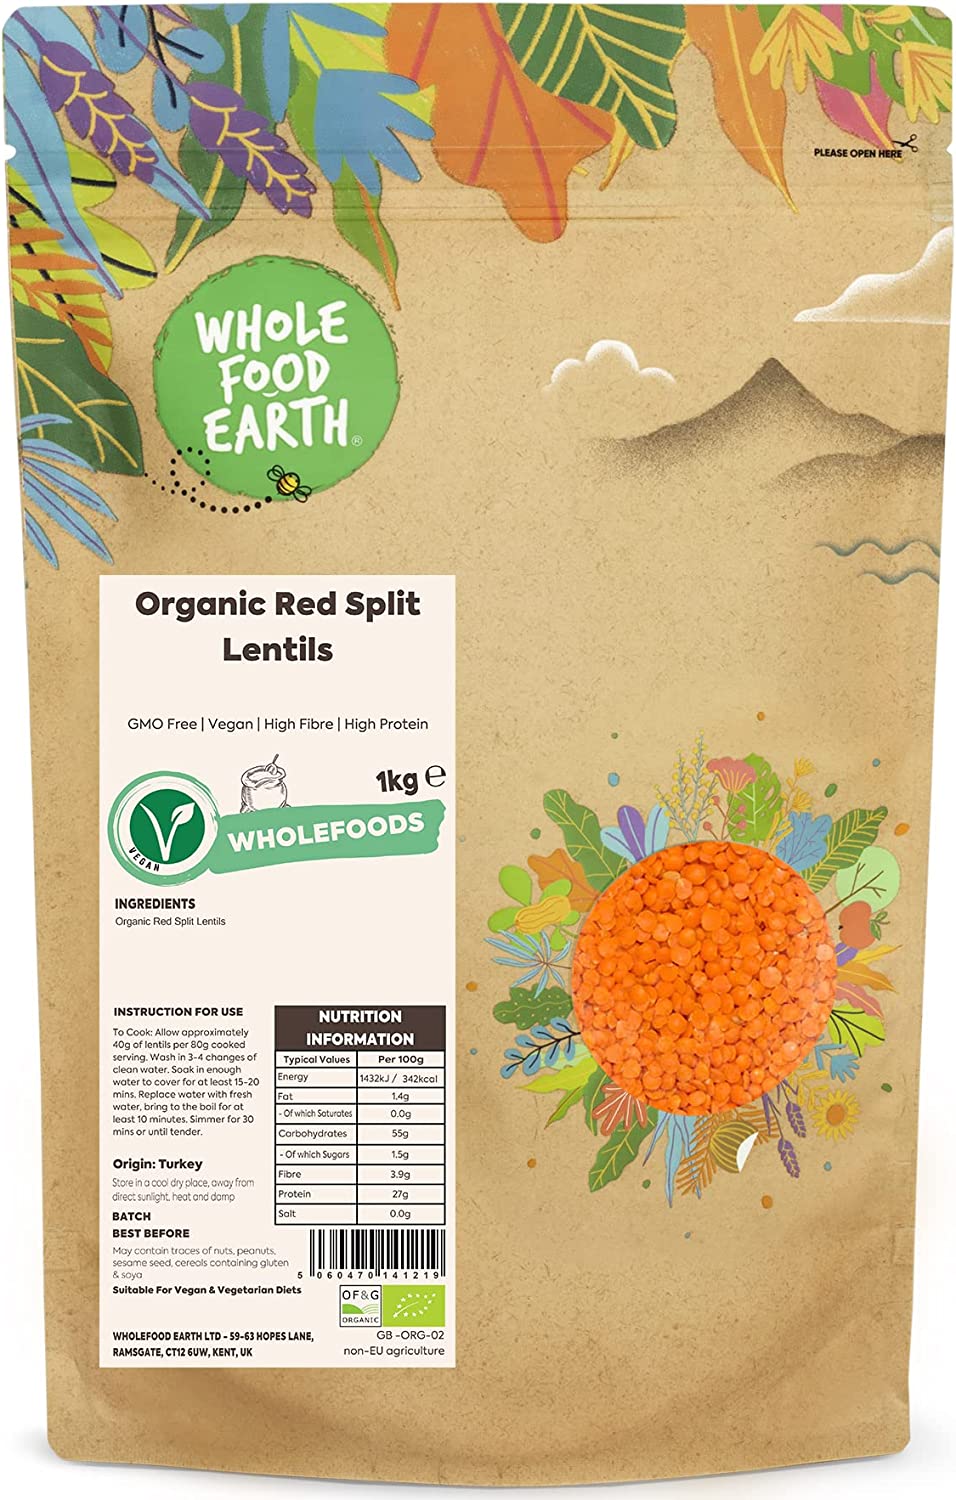 Wholefood Earth Organic Red Split Lentils 1kg (Oct 22) RRP £10.95 CLEARANCE XL £6.99